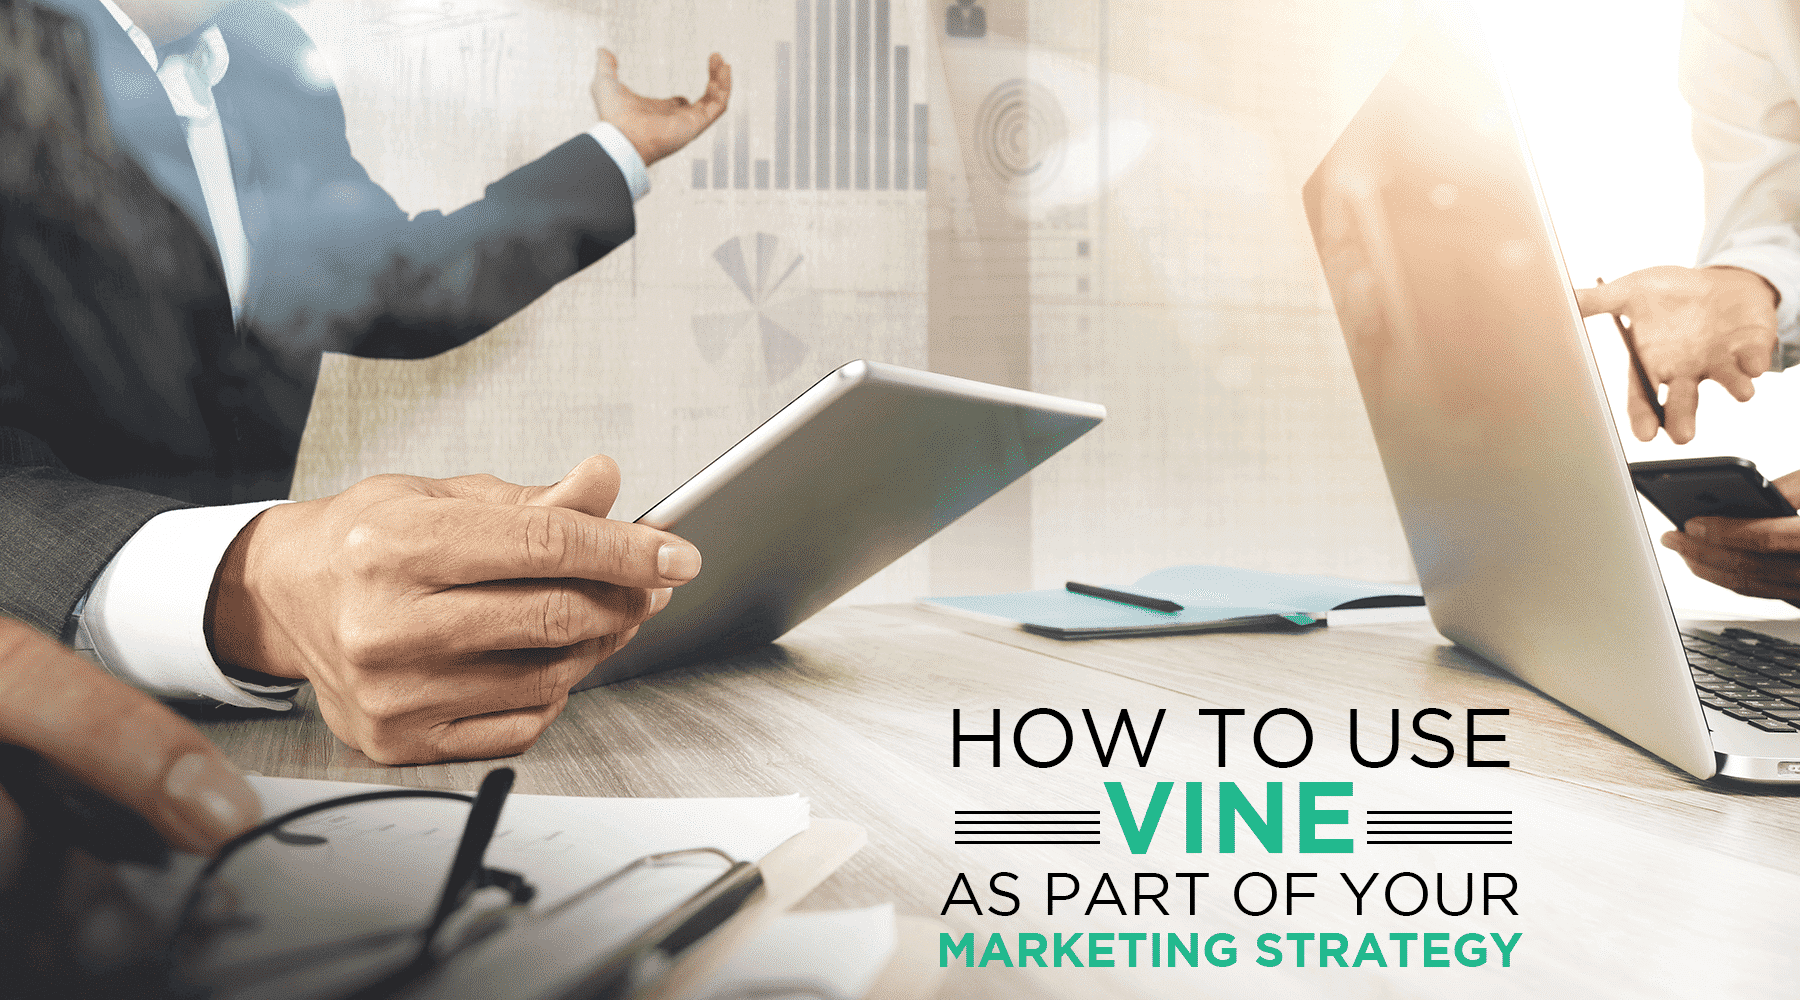 How to Use Vine as Part of Your Marketing Strategy